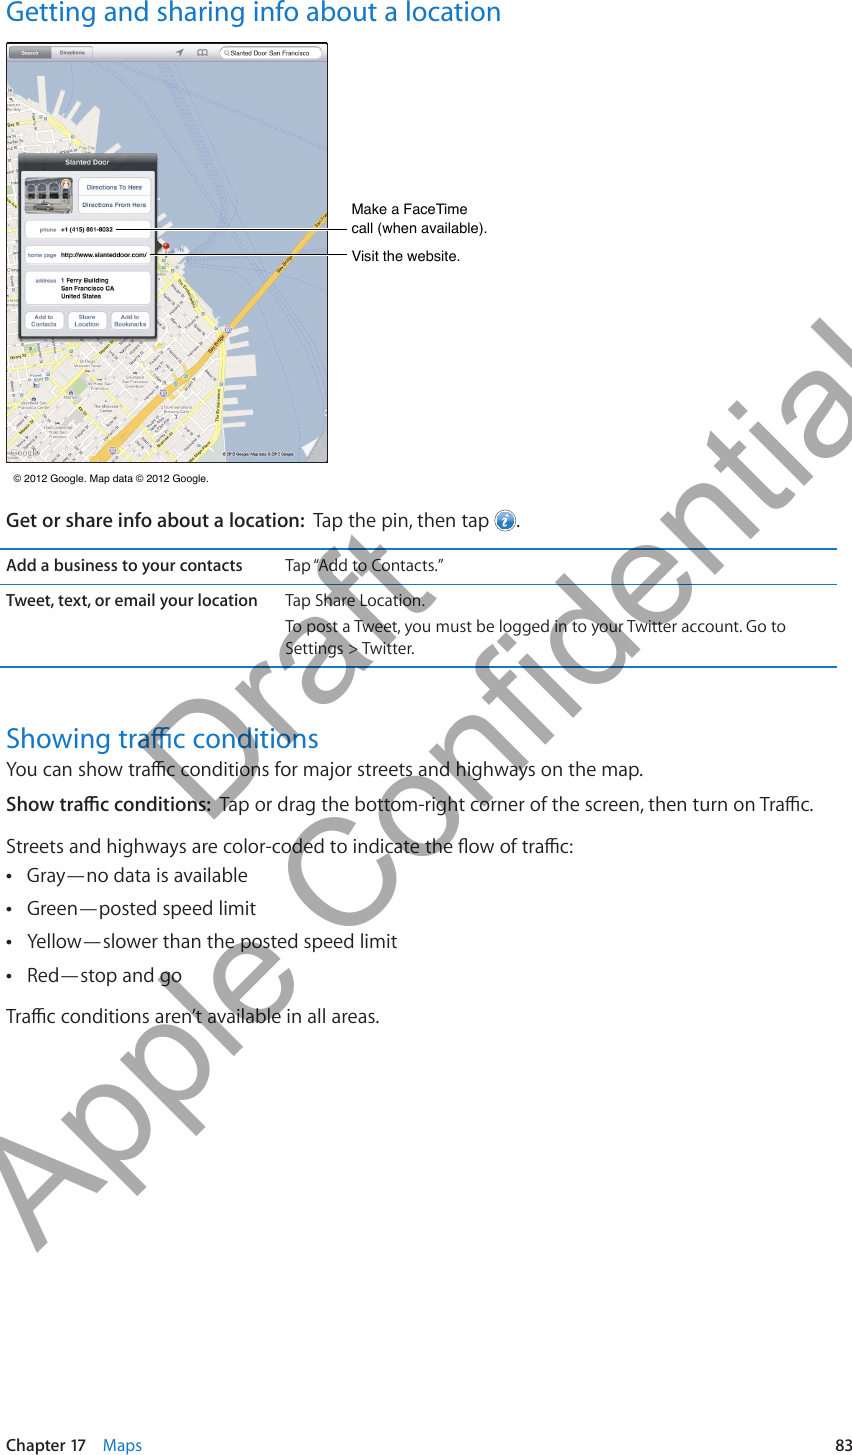 Getting and sharing info about a locationMake a FaceTime call (when available).Make a FaceTime call (when available).Visit the website.Visit the website. © 2012 Google. Map data © 2012 Google.  © 2012 Google. Map data © 2012 Google. Get or share info about a location:  Tap the pin, then tap  .Add a business to your contacts Tap “Add to Contacts.” Tap Share Location.To post a Tweet, you must be logged in to your Twitter account. Go to Settings &gt; Twitter.Gray—no data is available ÂGreen—posted speed limit ÂYellow—slower than the posted speed limit ÂRed—stop and go Â83Chapter 17    Maps          Draft  Apple Confidential 